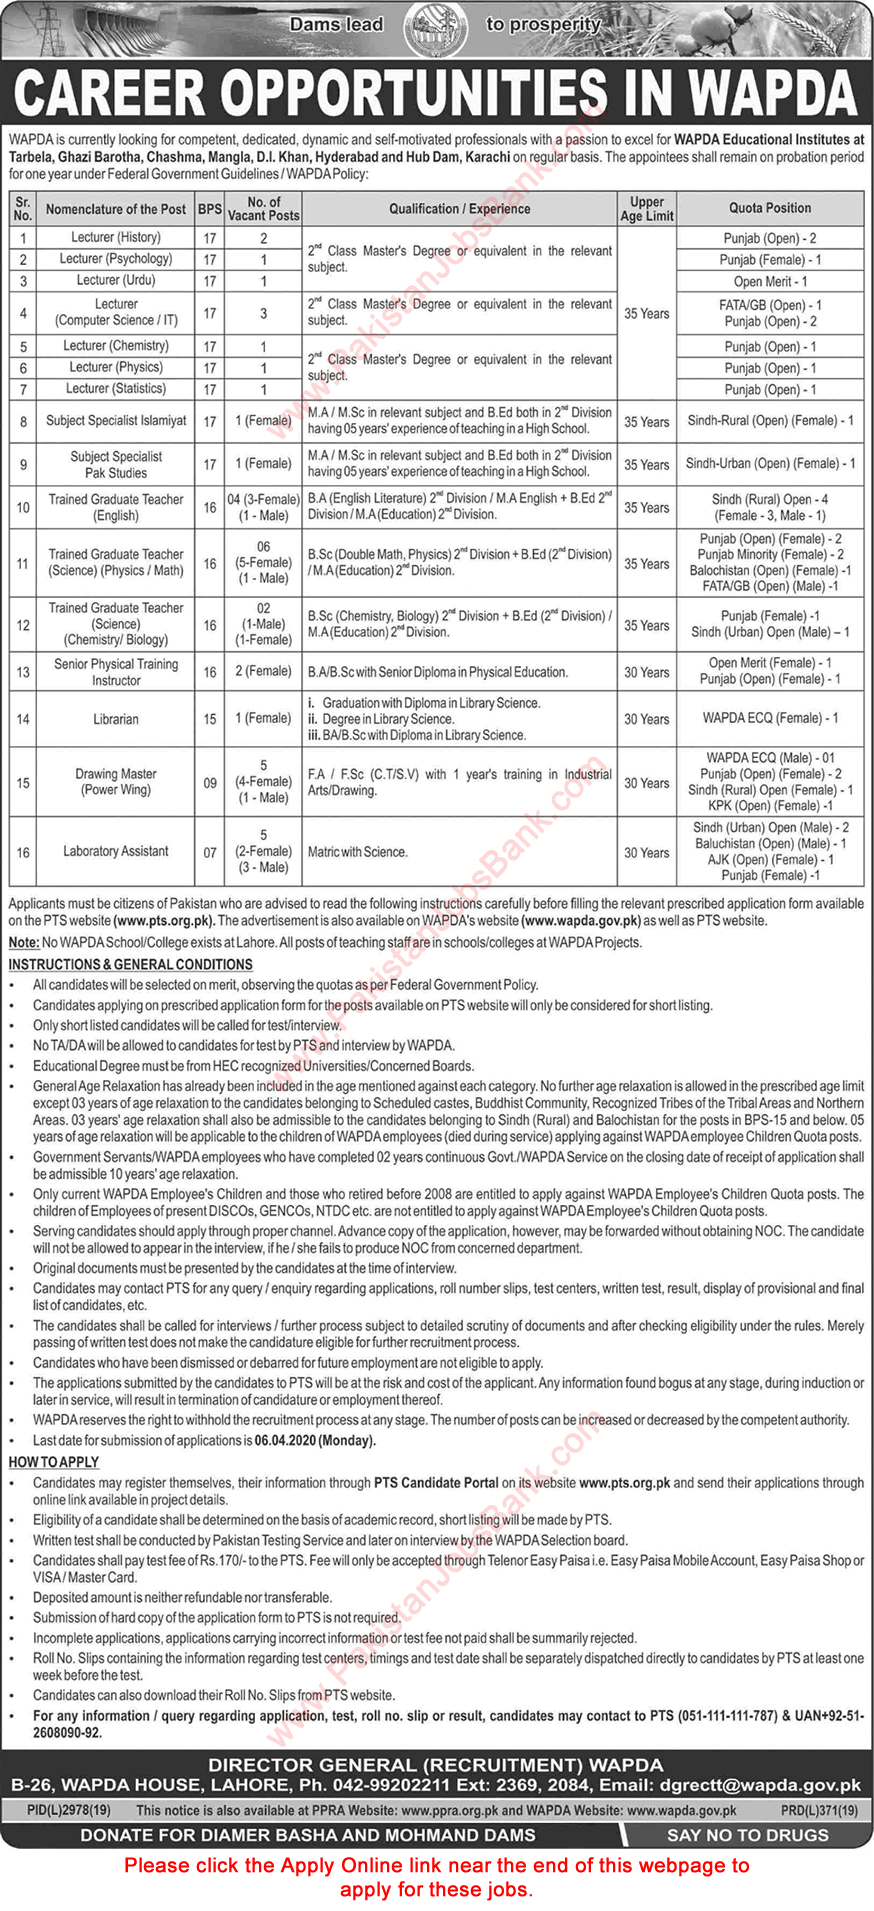 WAPDA Jobs March 2020 PTS Online Apply Lecturers, Teachers, Lab Assistants & Others Latest